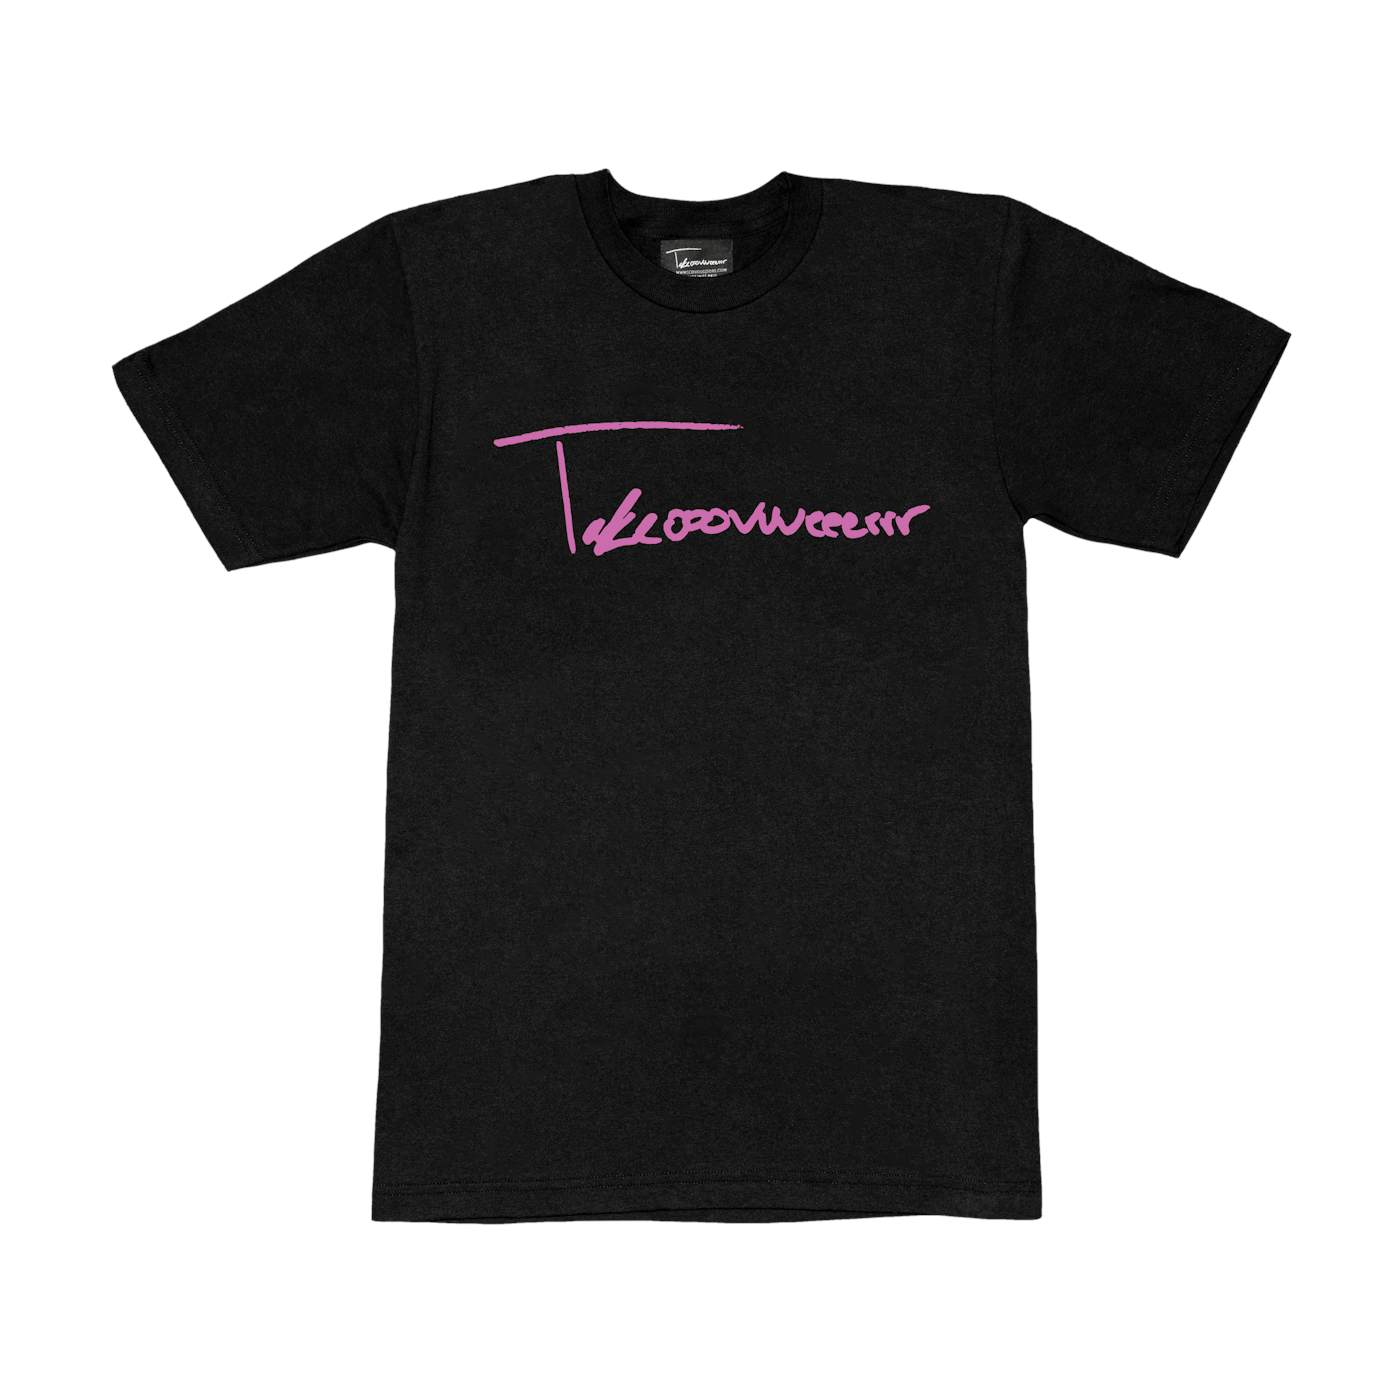 Taylor J Takeover Signature Tee (Black/Pink)